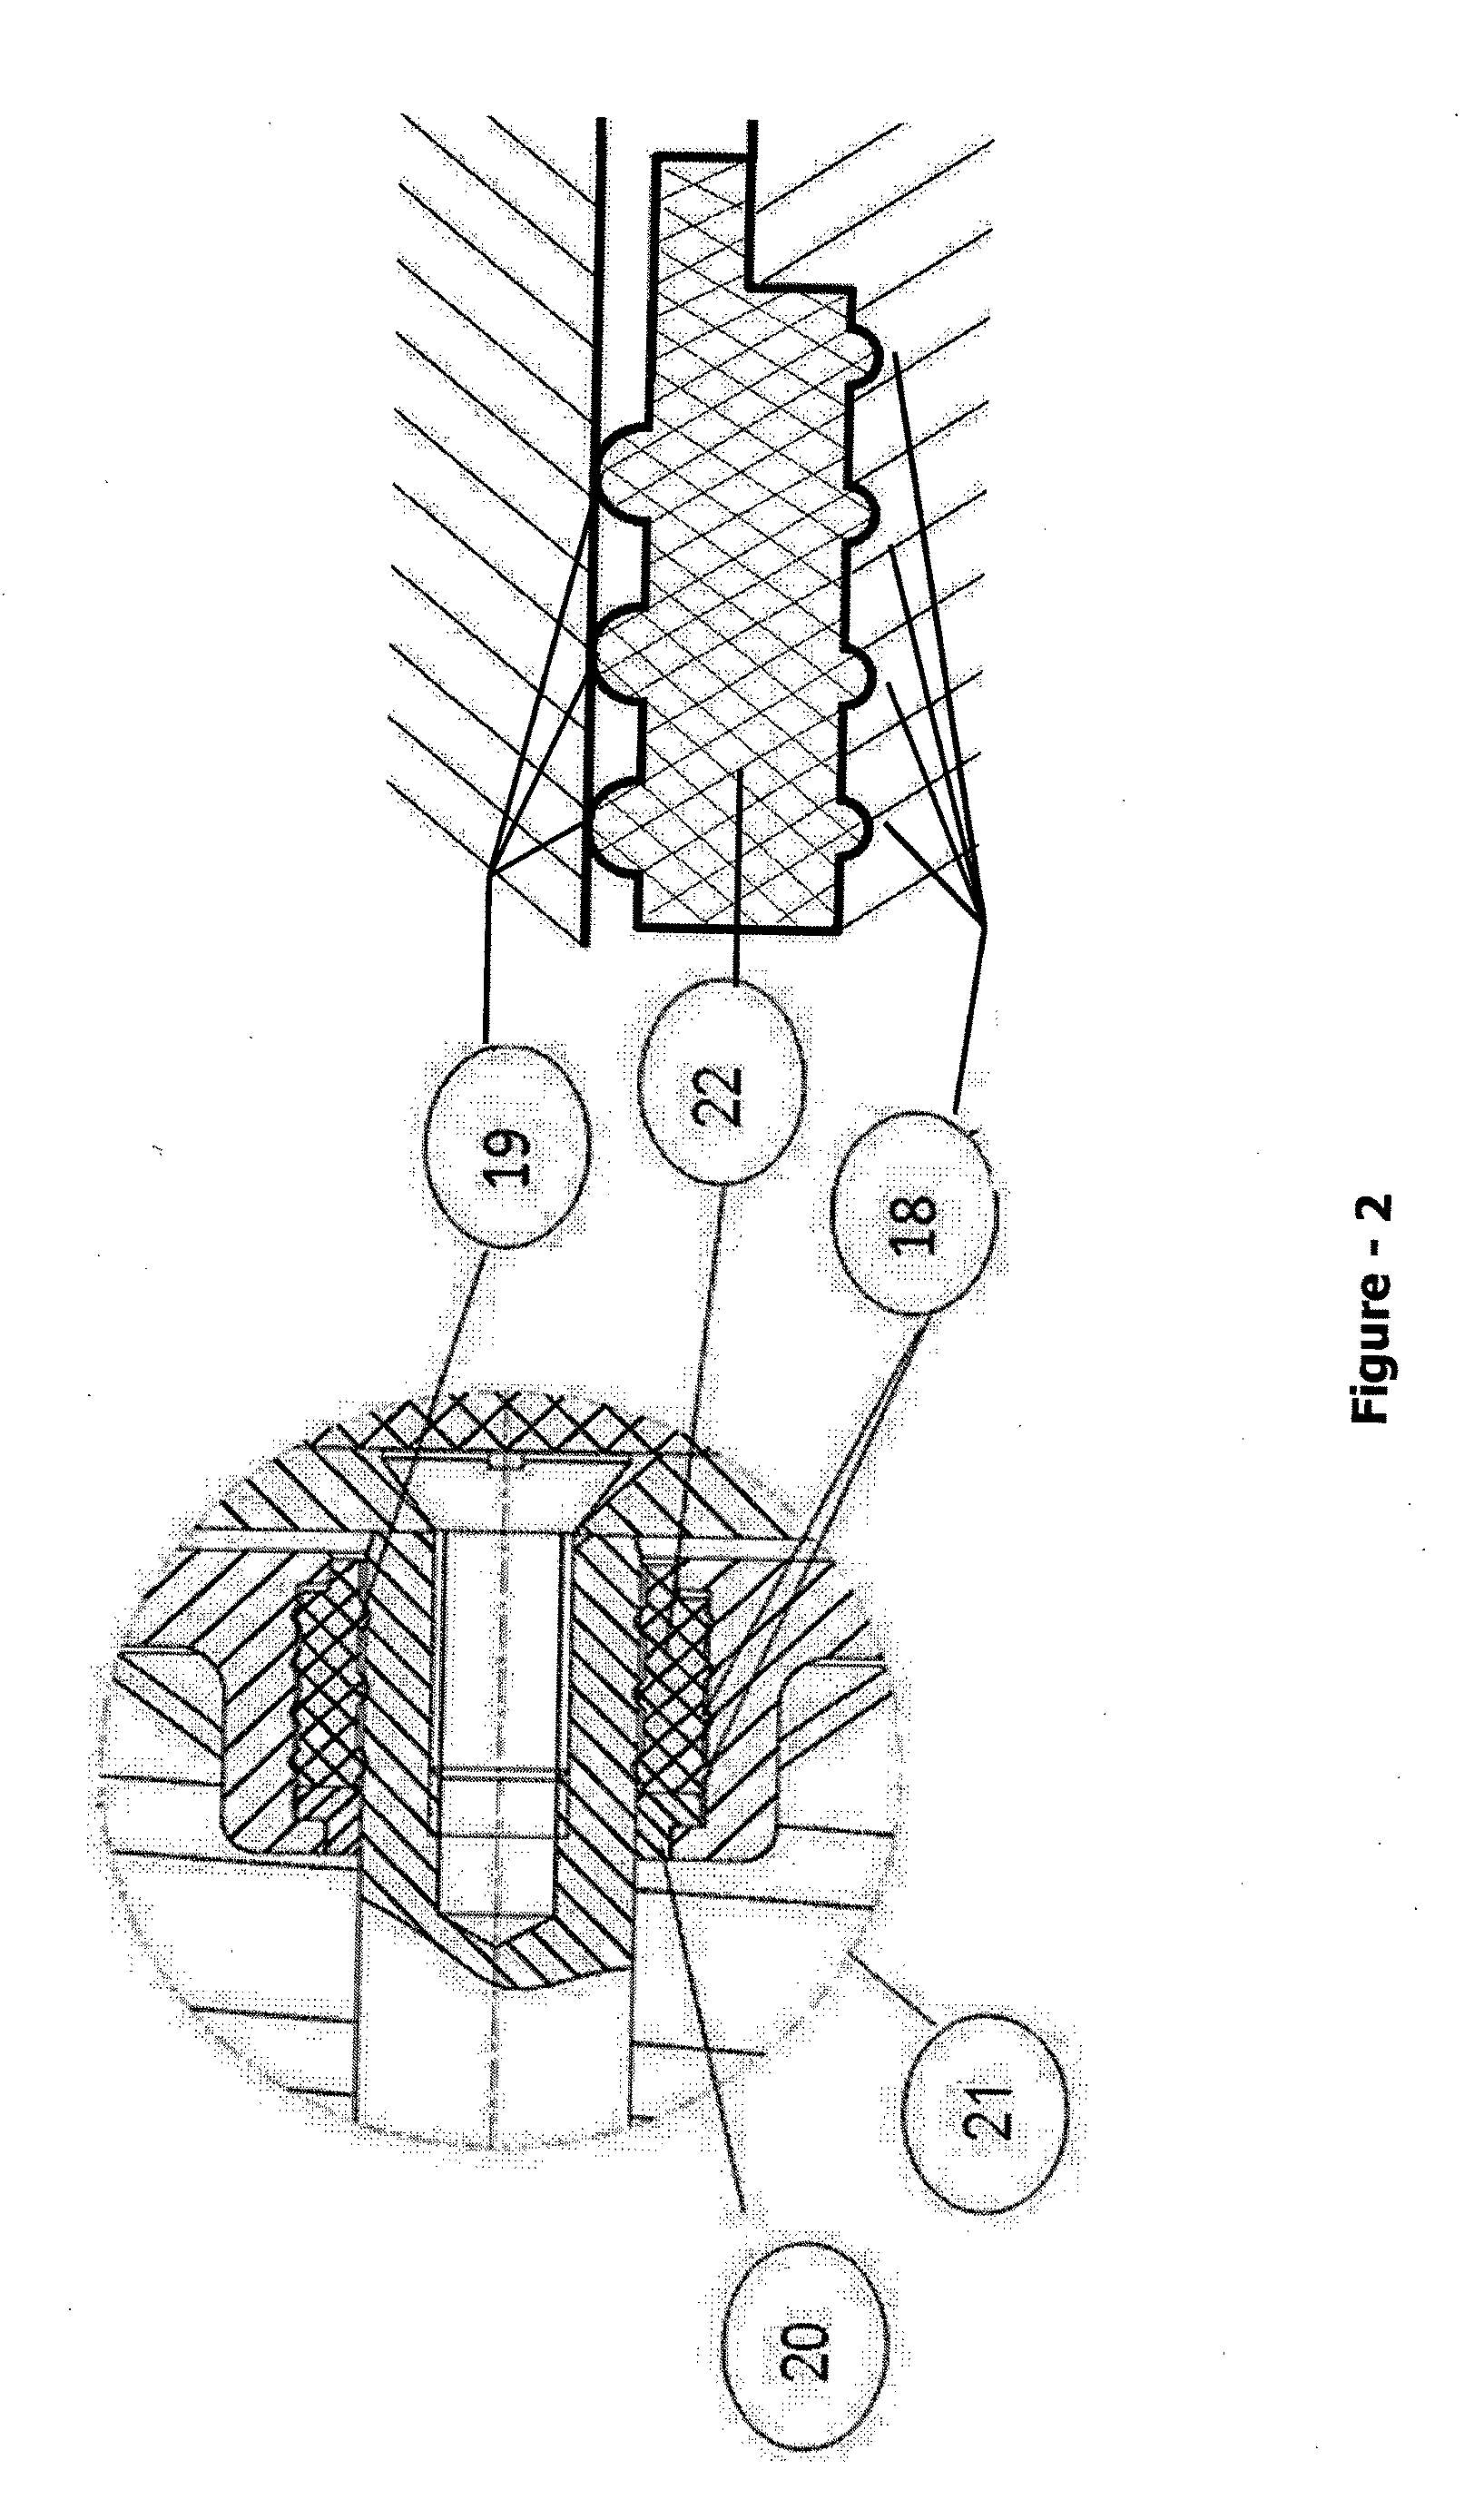 Center bearing of adapter plate comprising rubber and rigid plastic members developed for spring brake actuators